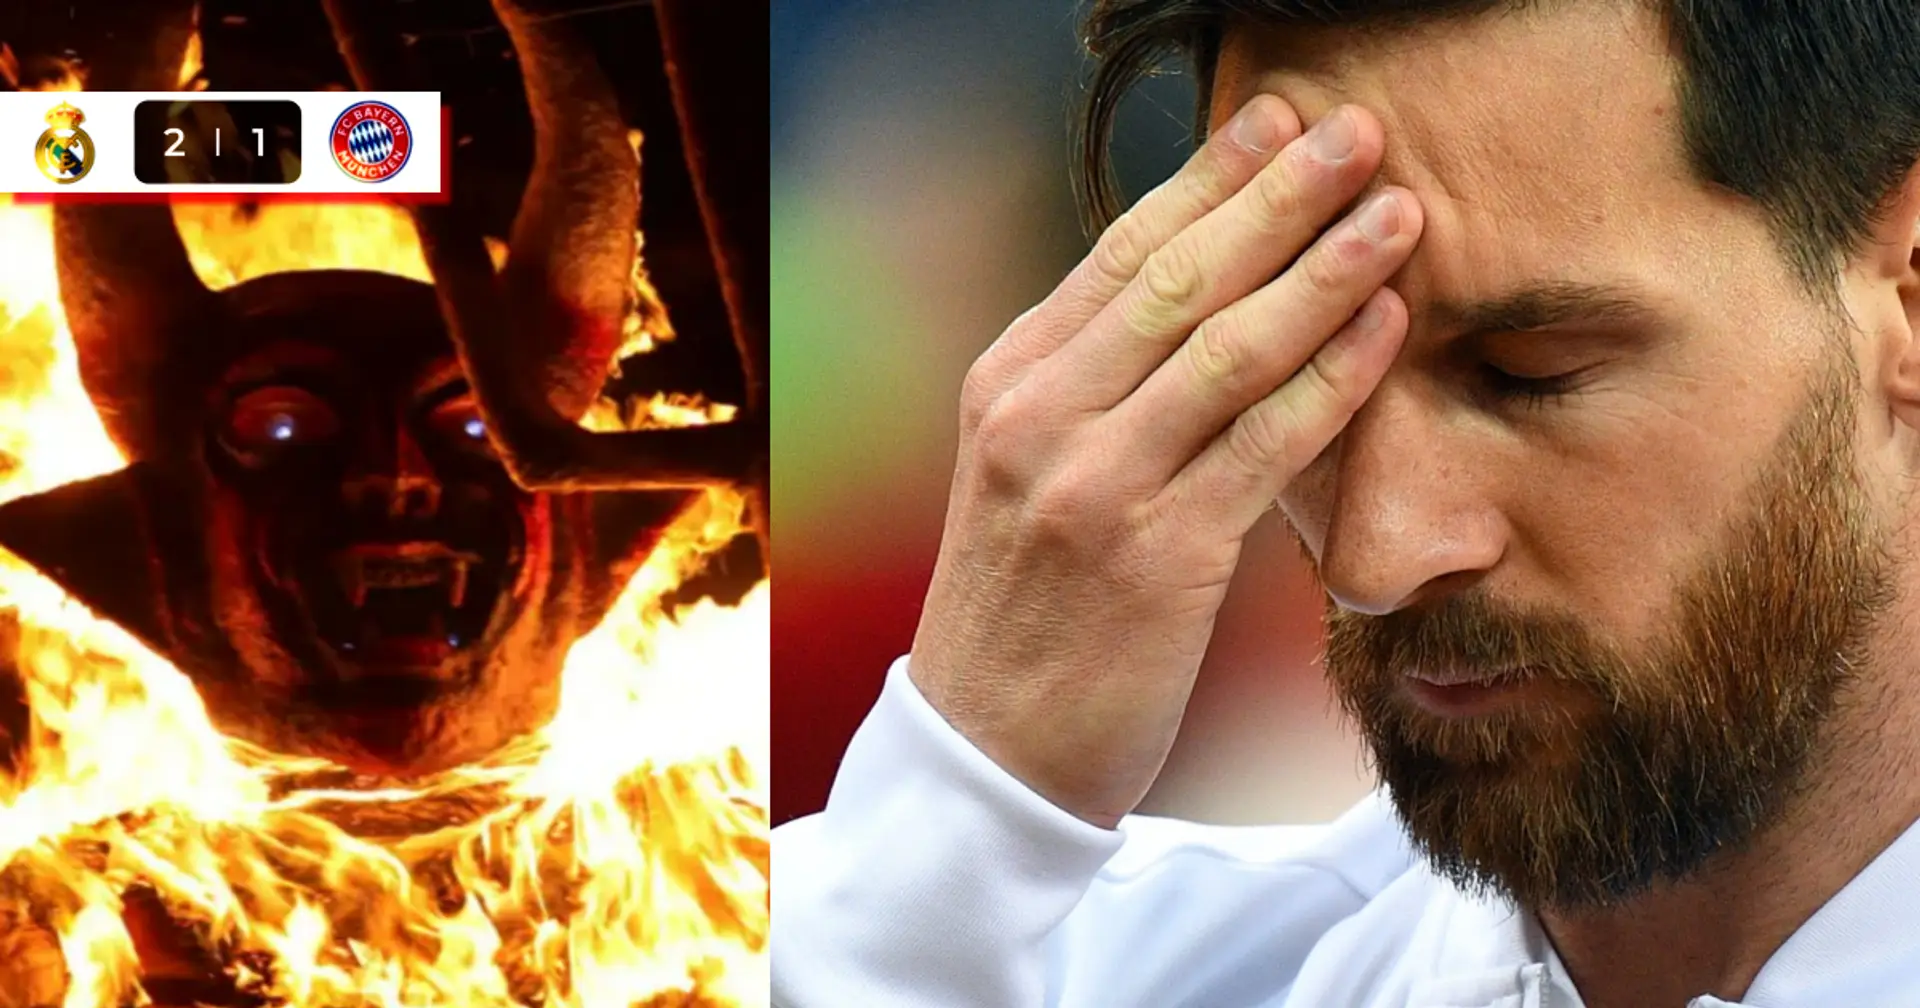 Leo Messi told he 'fought Satanism' following Real Madrid v Bayern